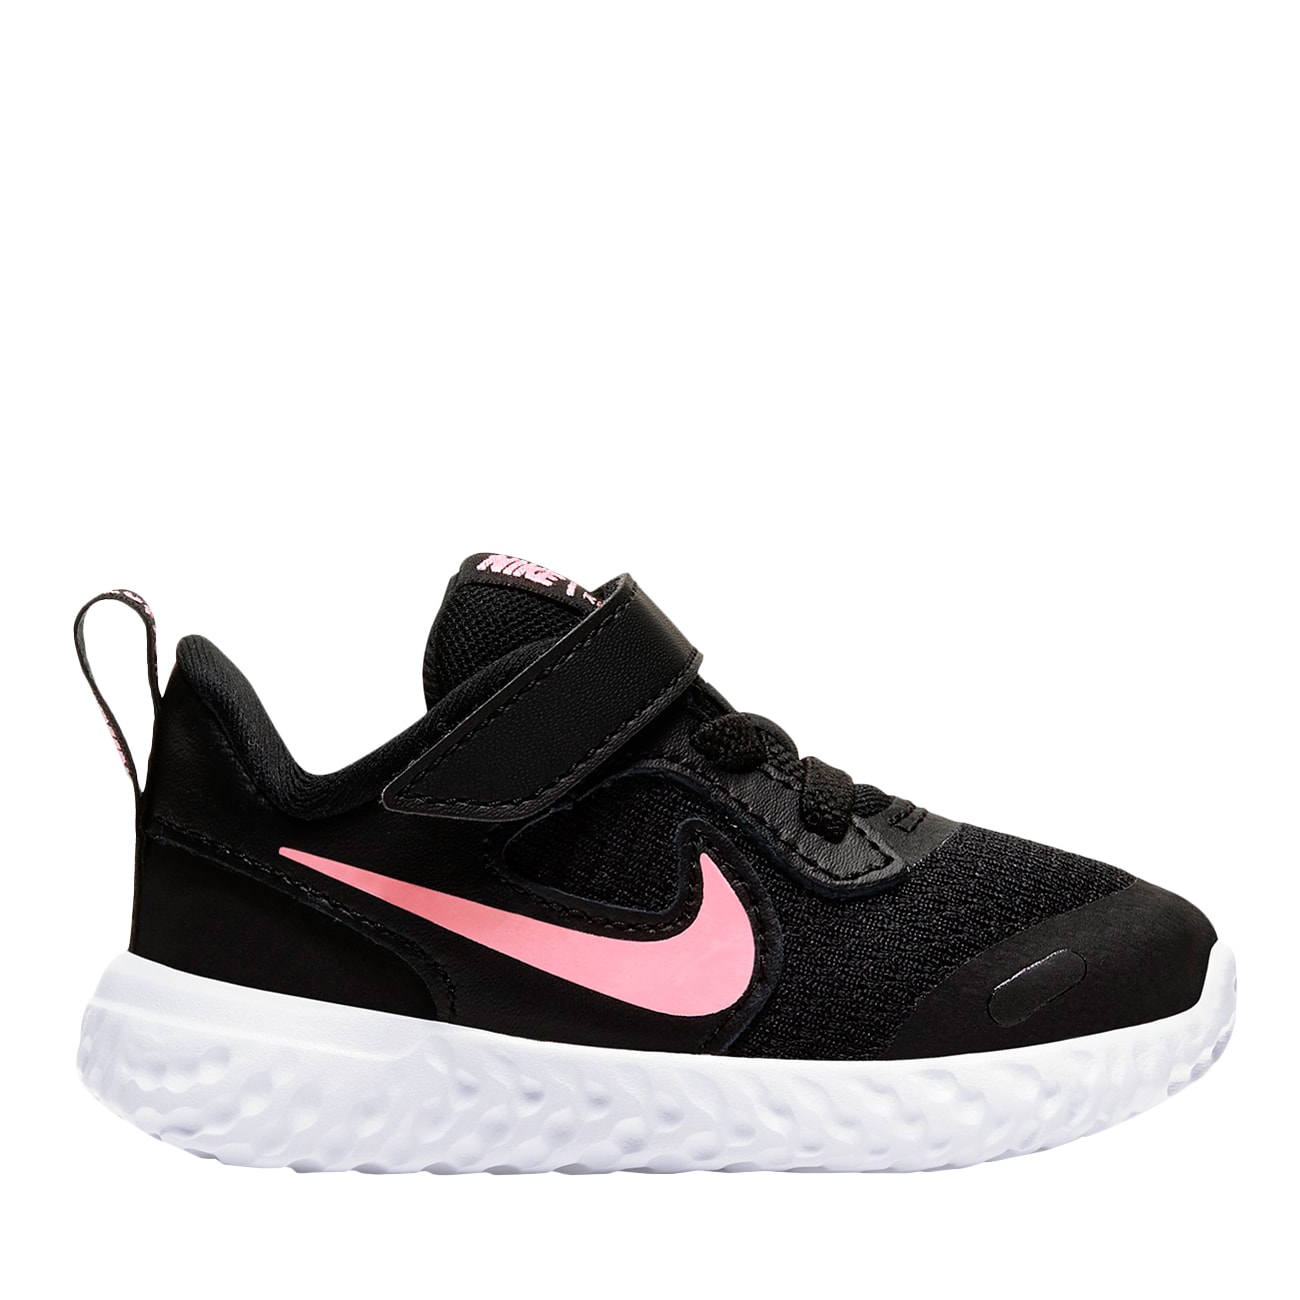 nike shoes for toddlers canada